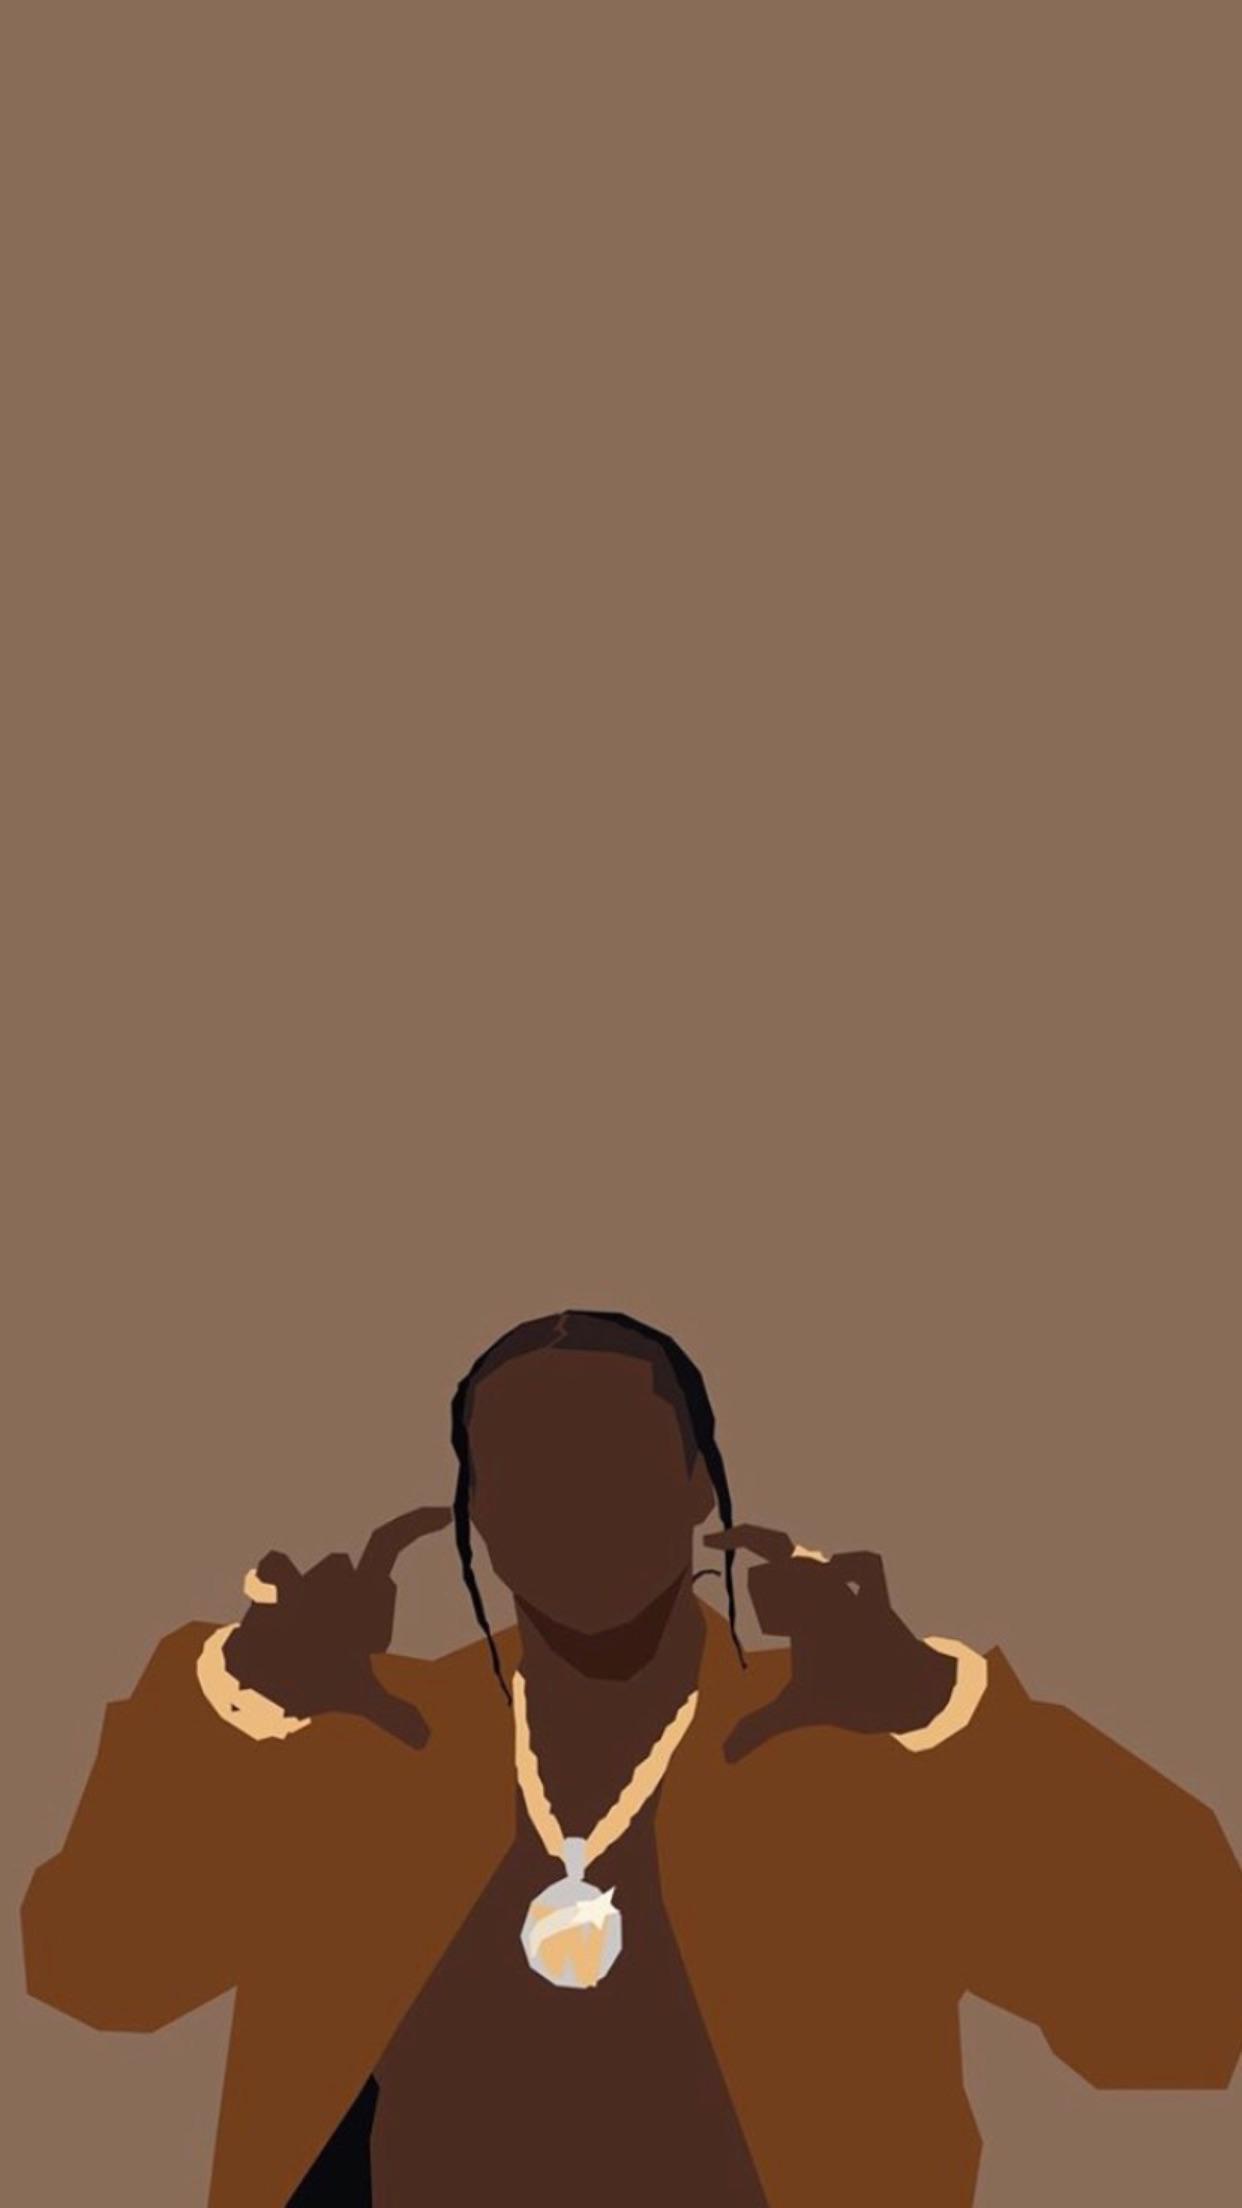 A picture of Travis Scott wearing a brown jacket and a chain around his neck. - Pop Smoke, brown